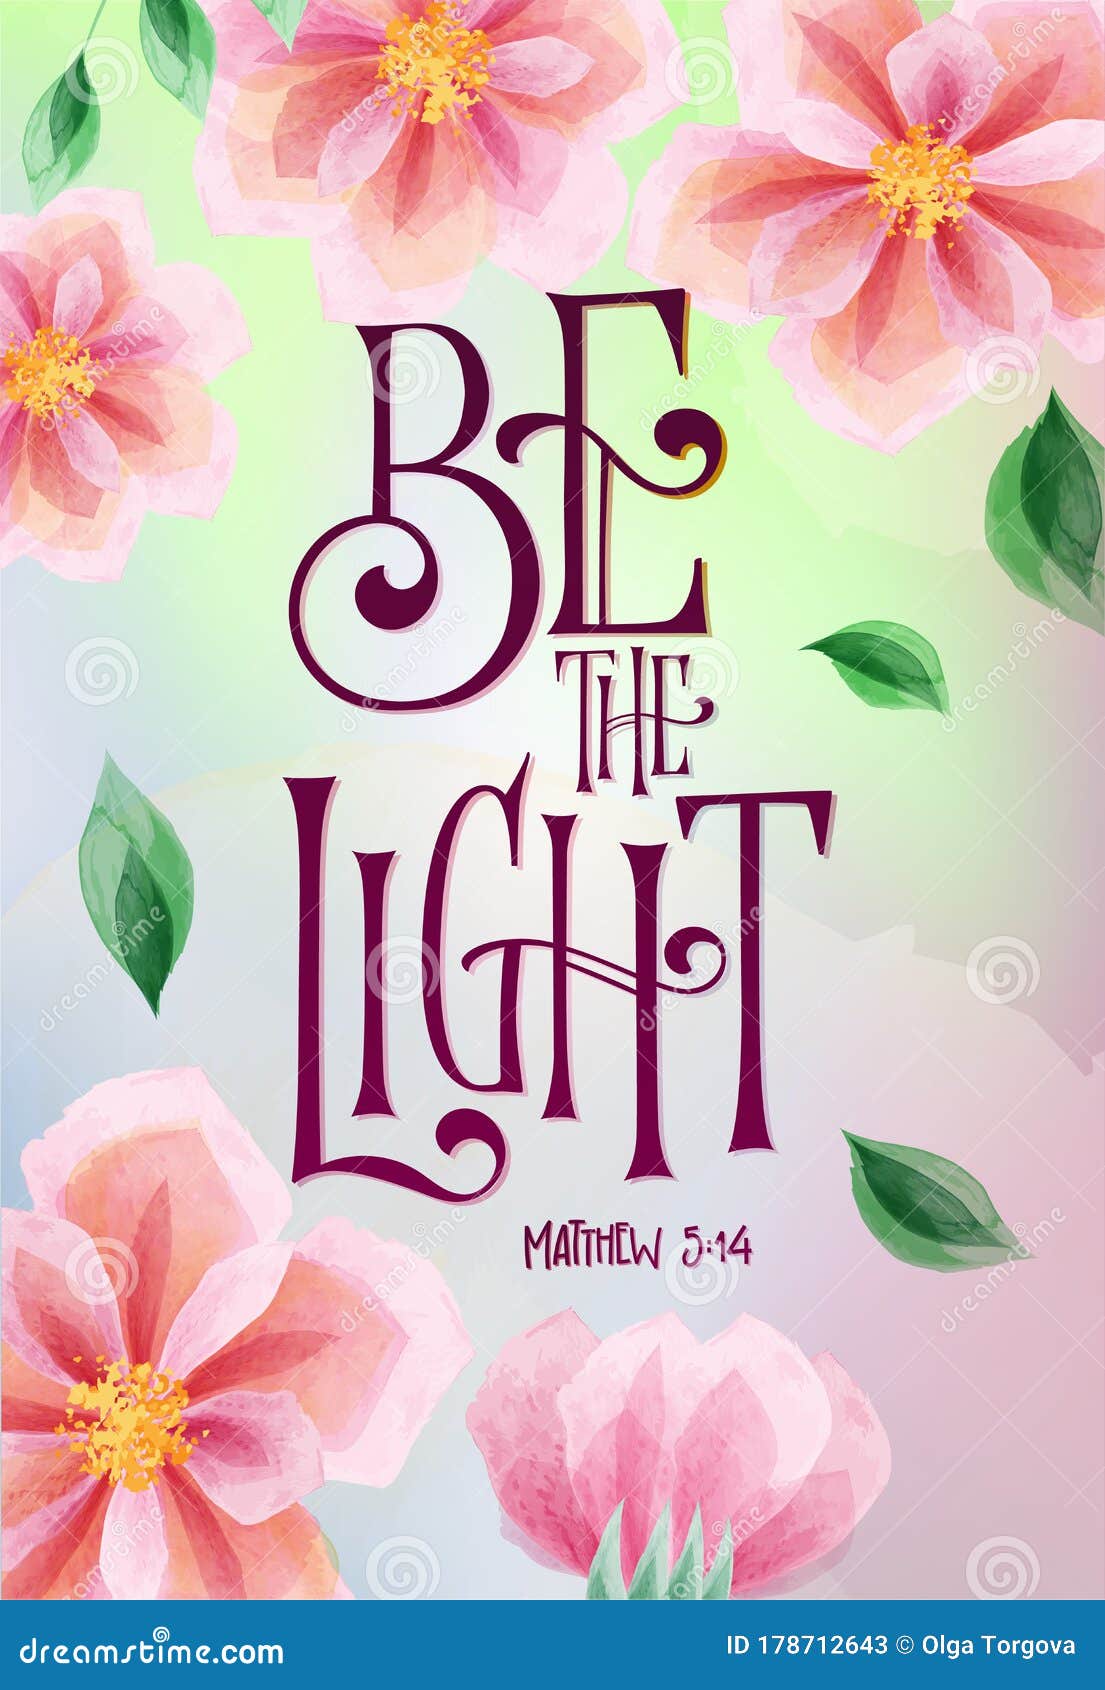 Be the Light - Hand Drawn Bible Quote Lettering Design. Psalm Biblical Motivational Phrase Stock Vector - Illustration of love, 178712643